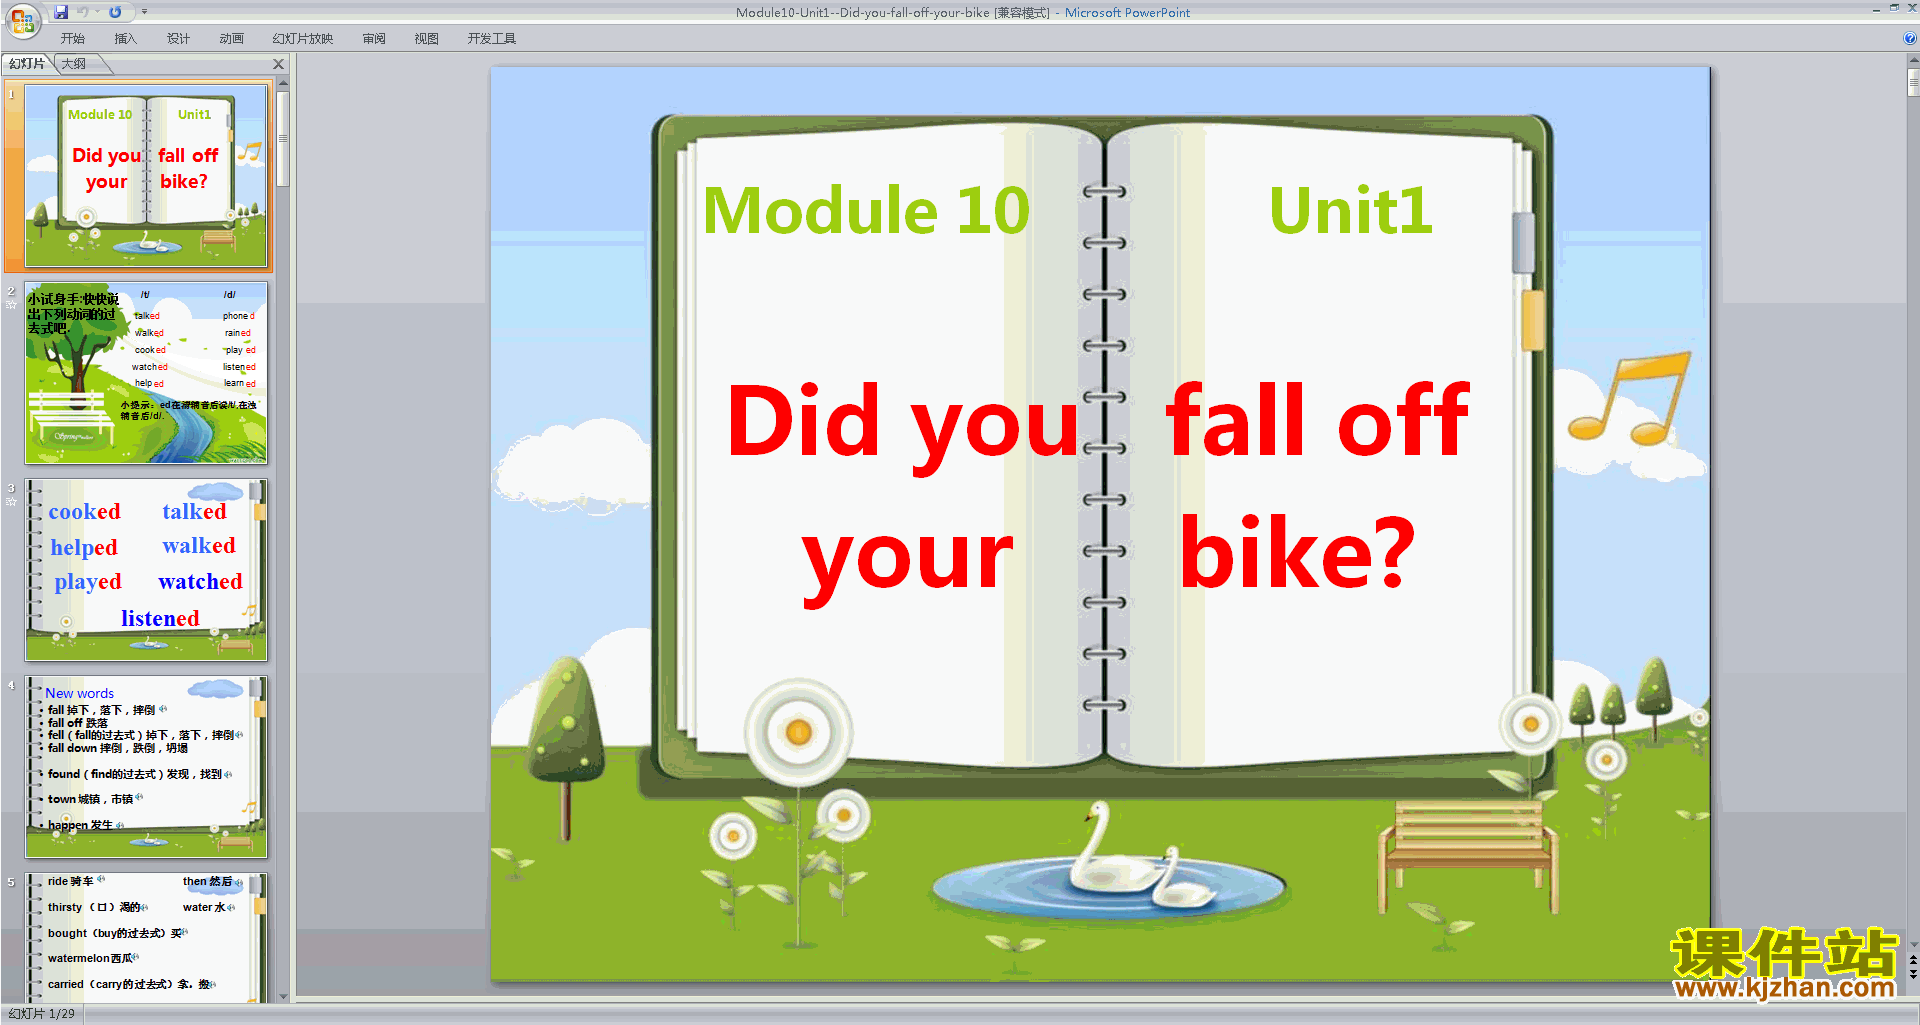 аӢUnit1 Did you fall off your bikepptμ